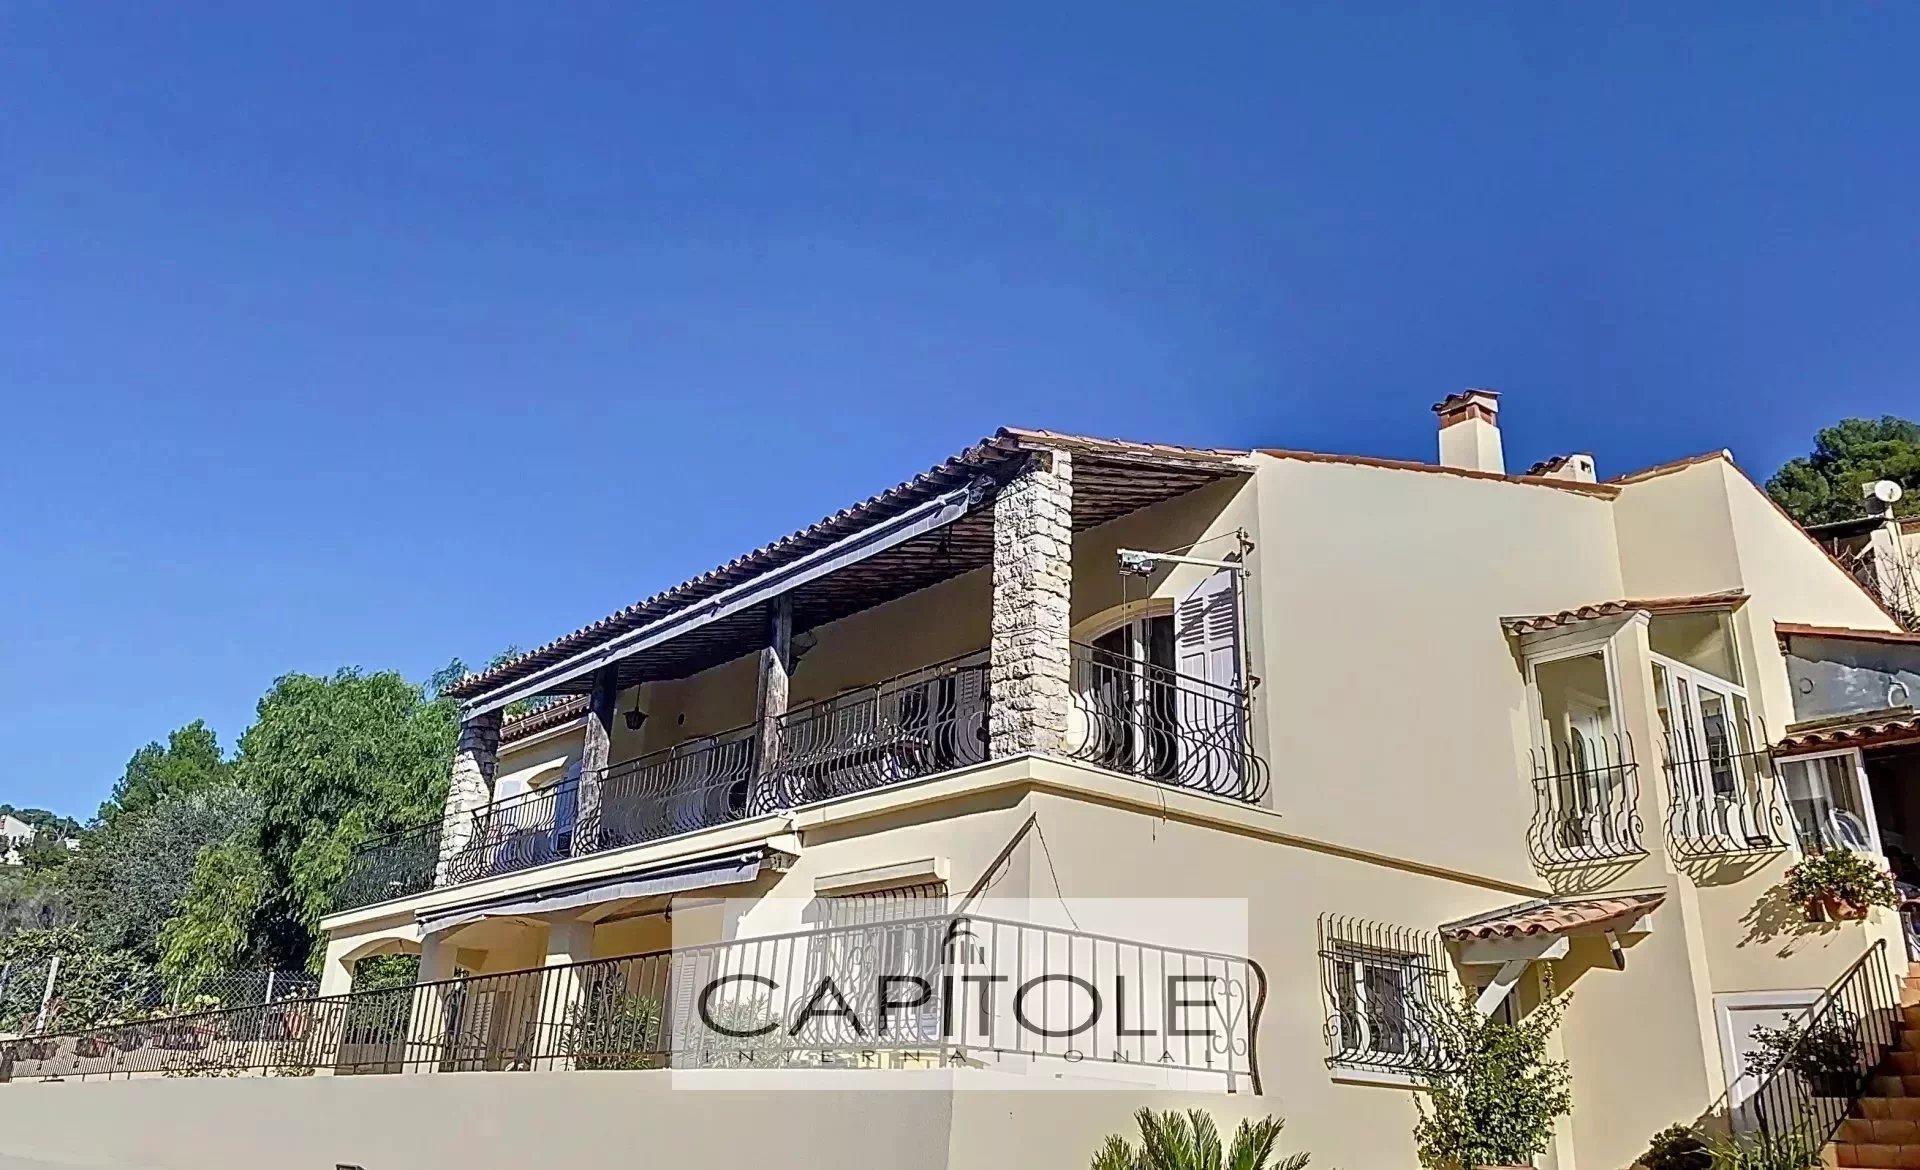 VALLAURIS - 8-room detached villa with swimming pool, 2 terraces and garden